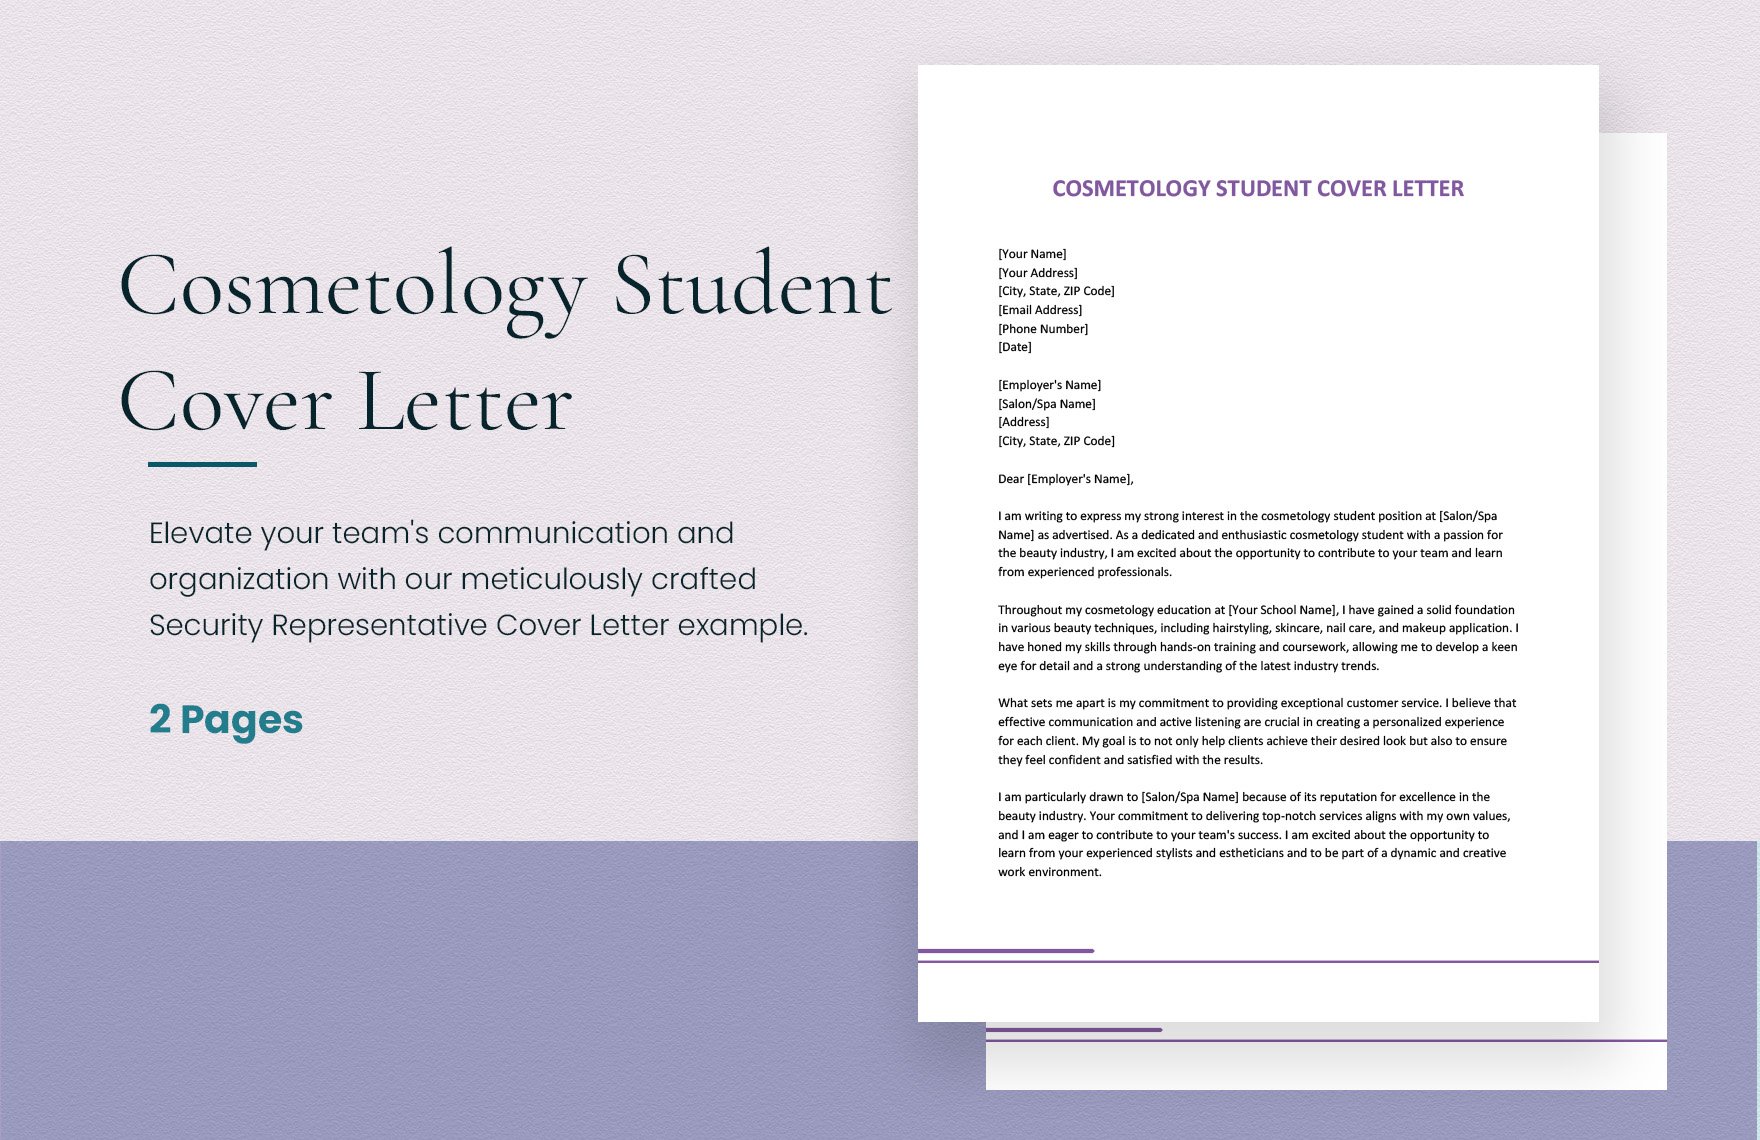 Cosmetology Student Cover Letter in Word, Google Docs